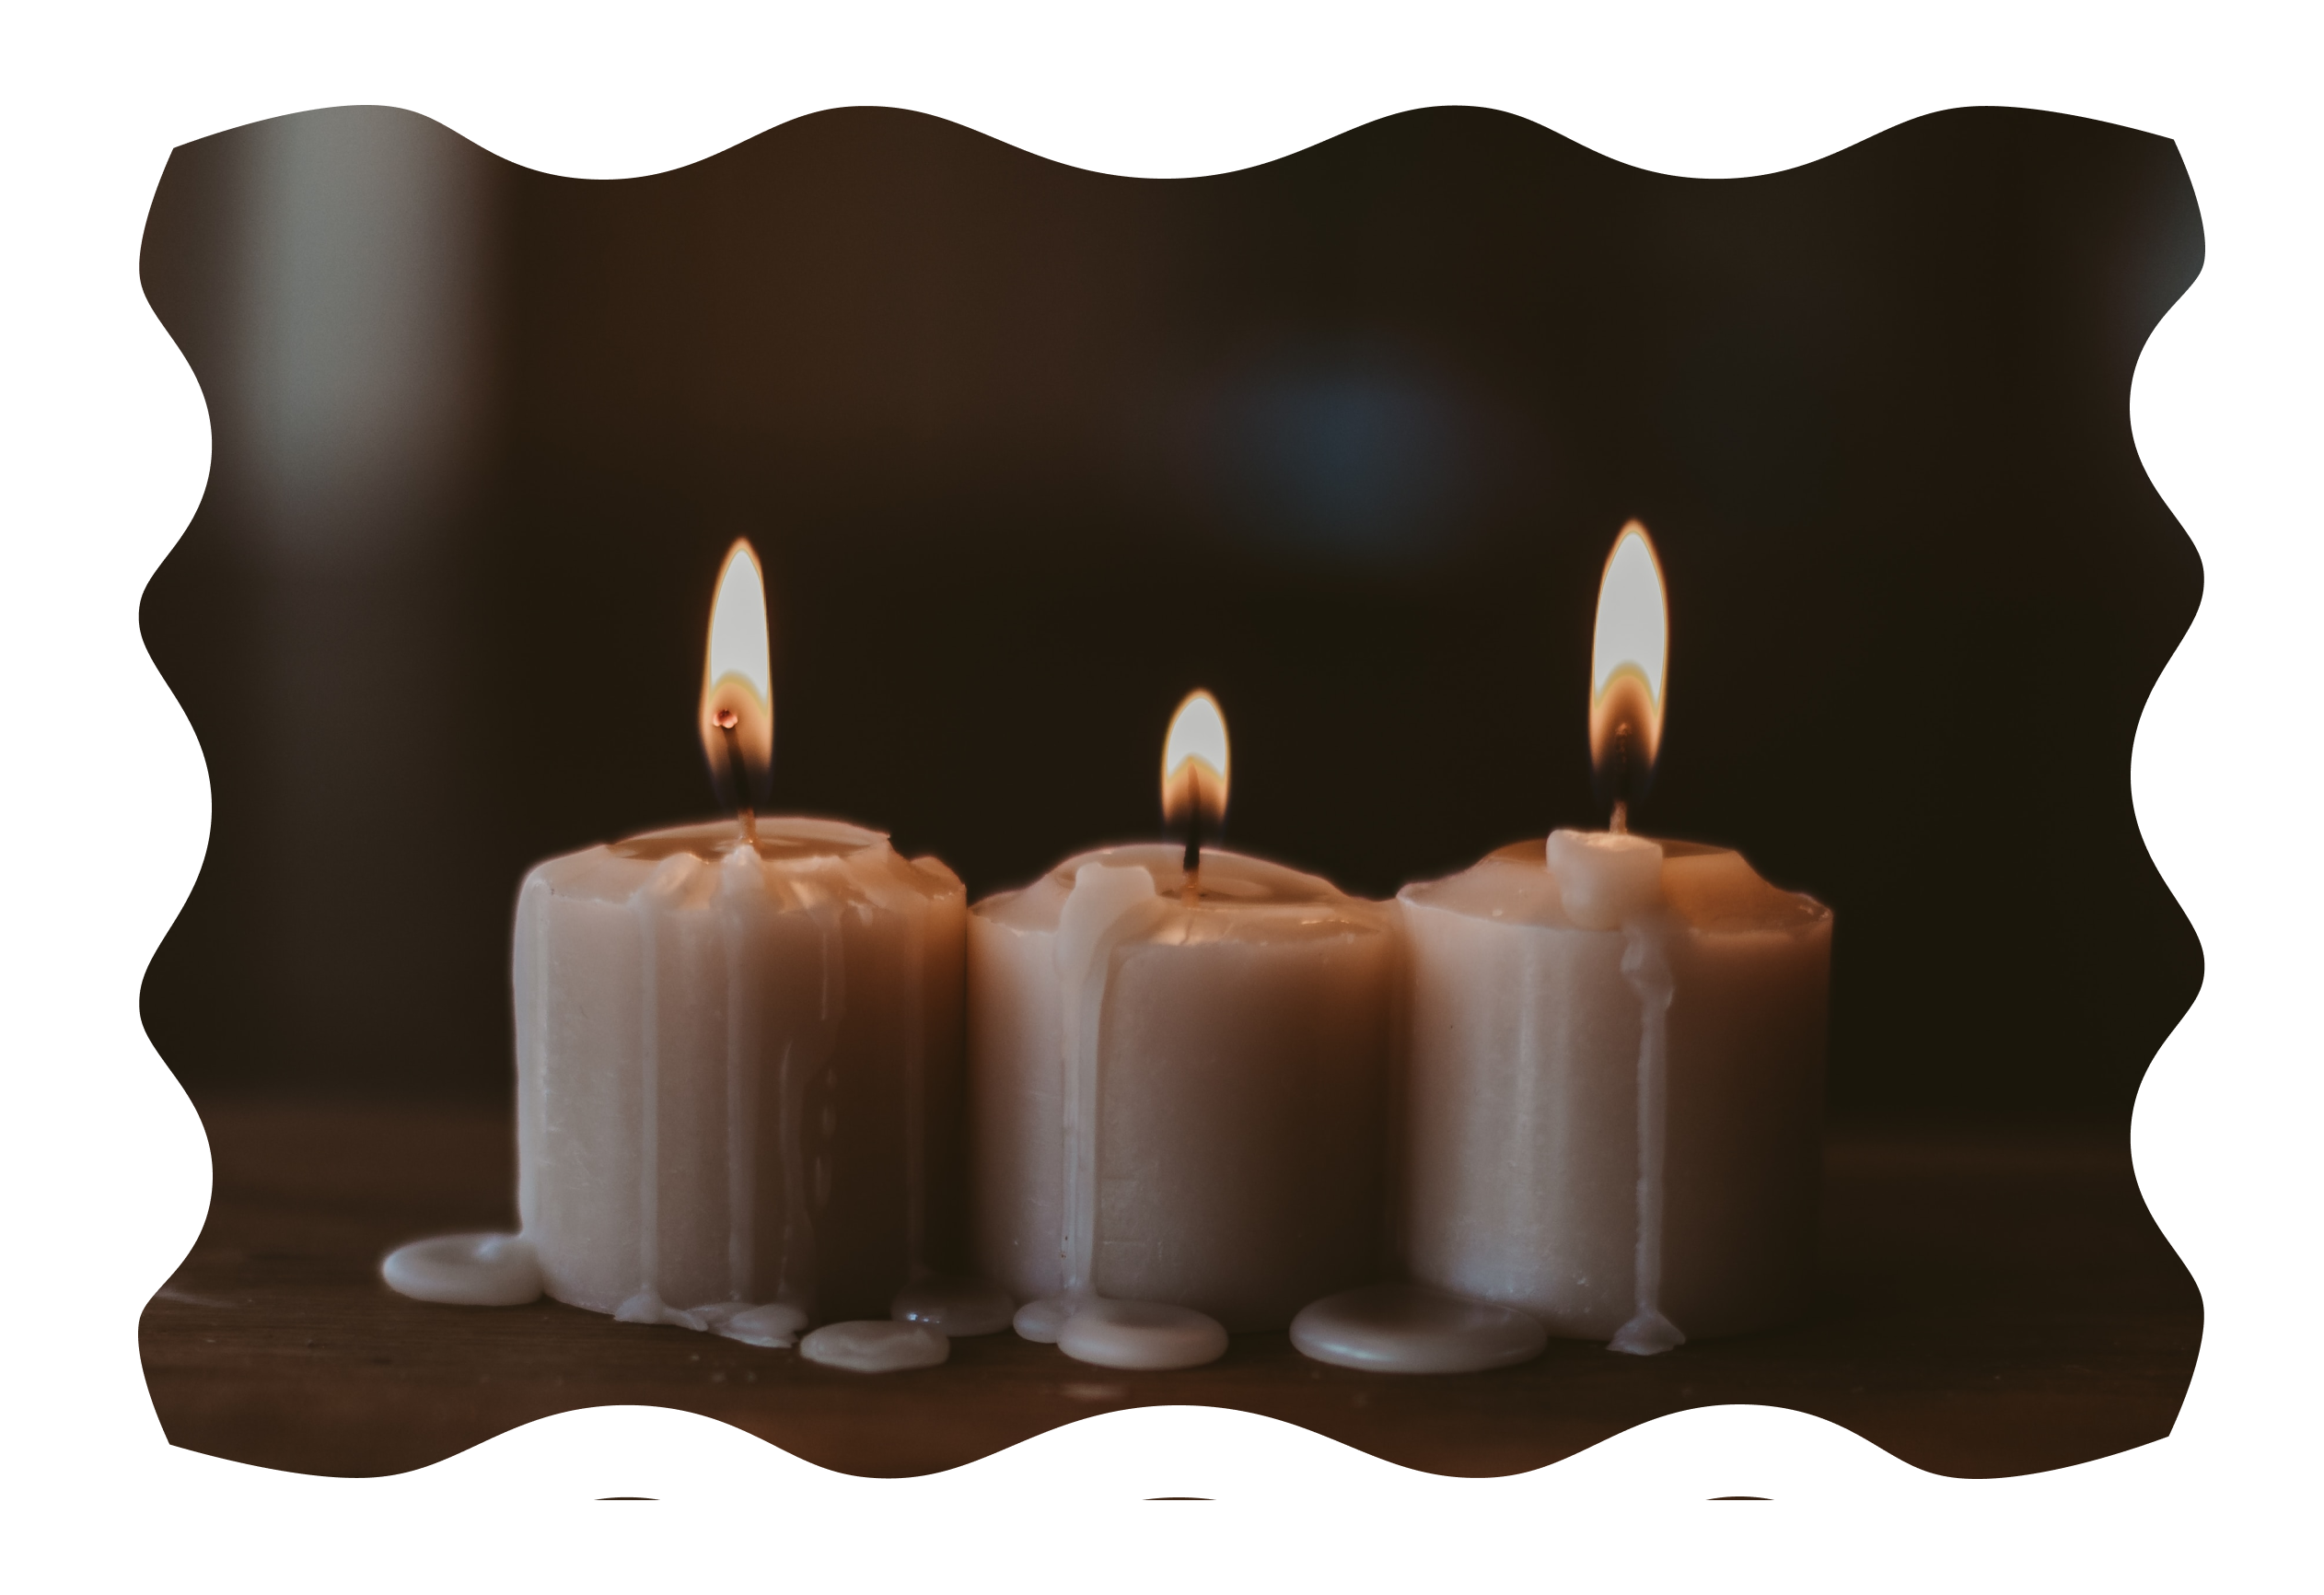 Image of white candles burning against a dark background.